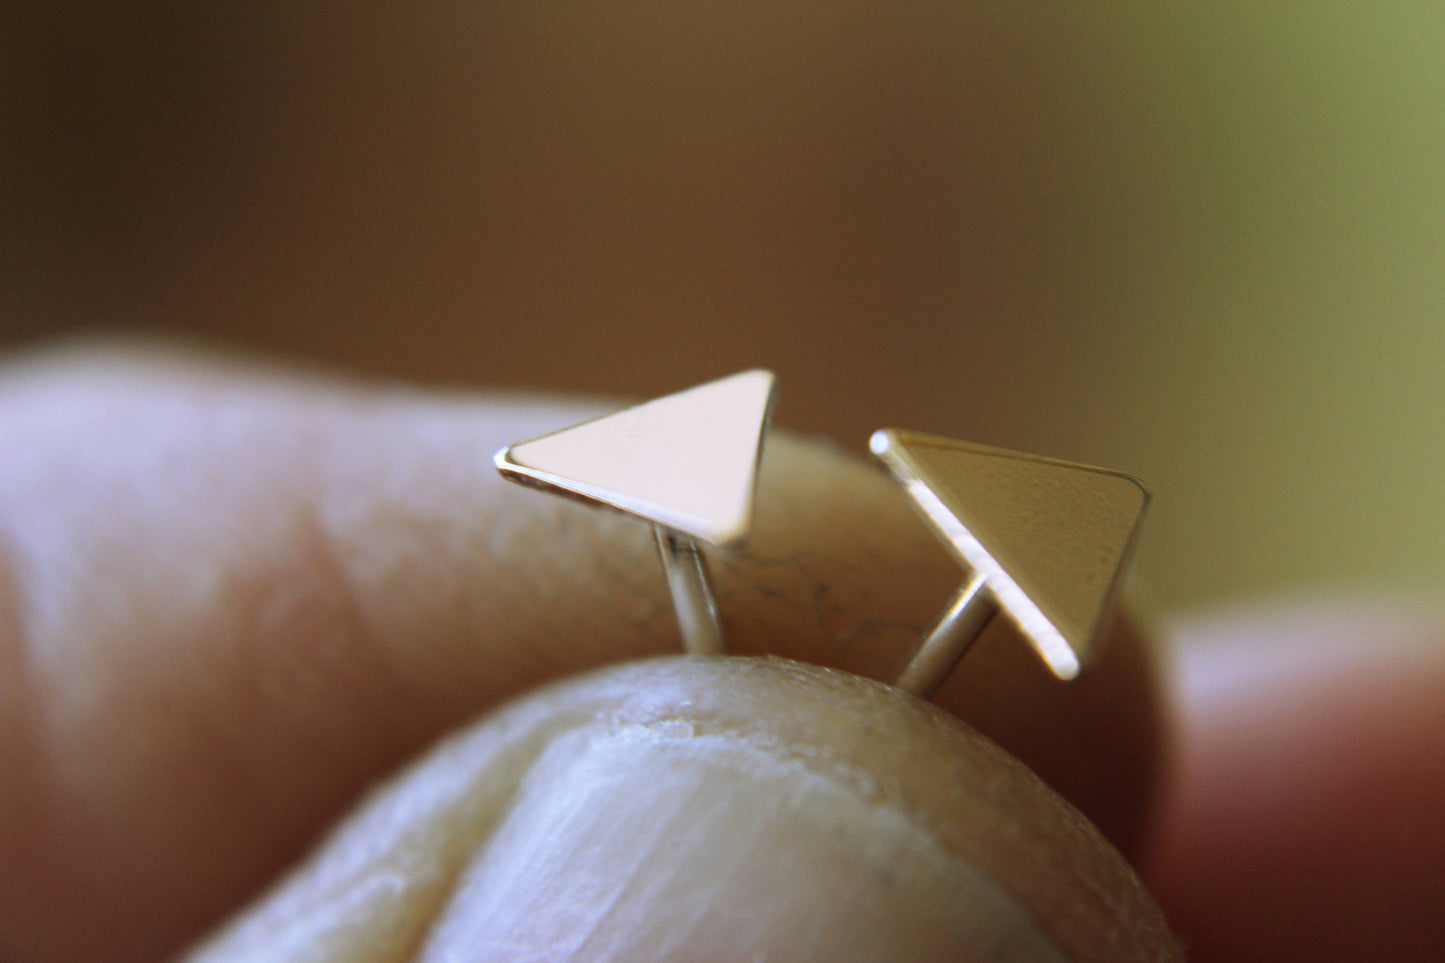 Triangle Studs, Simple Triangle Earrings, Small Studs, Silver Triangle Jewelry, Minimalist Earrings, Tiny Triangle Posts, Gift